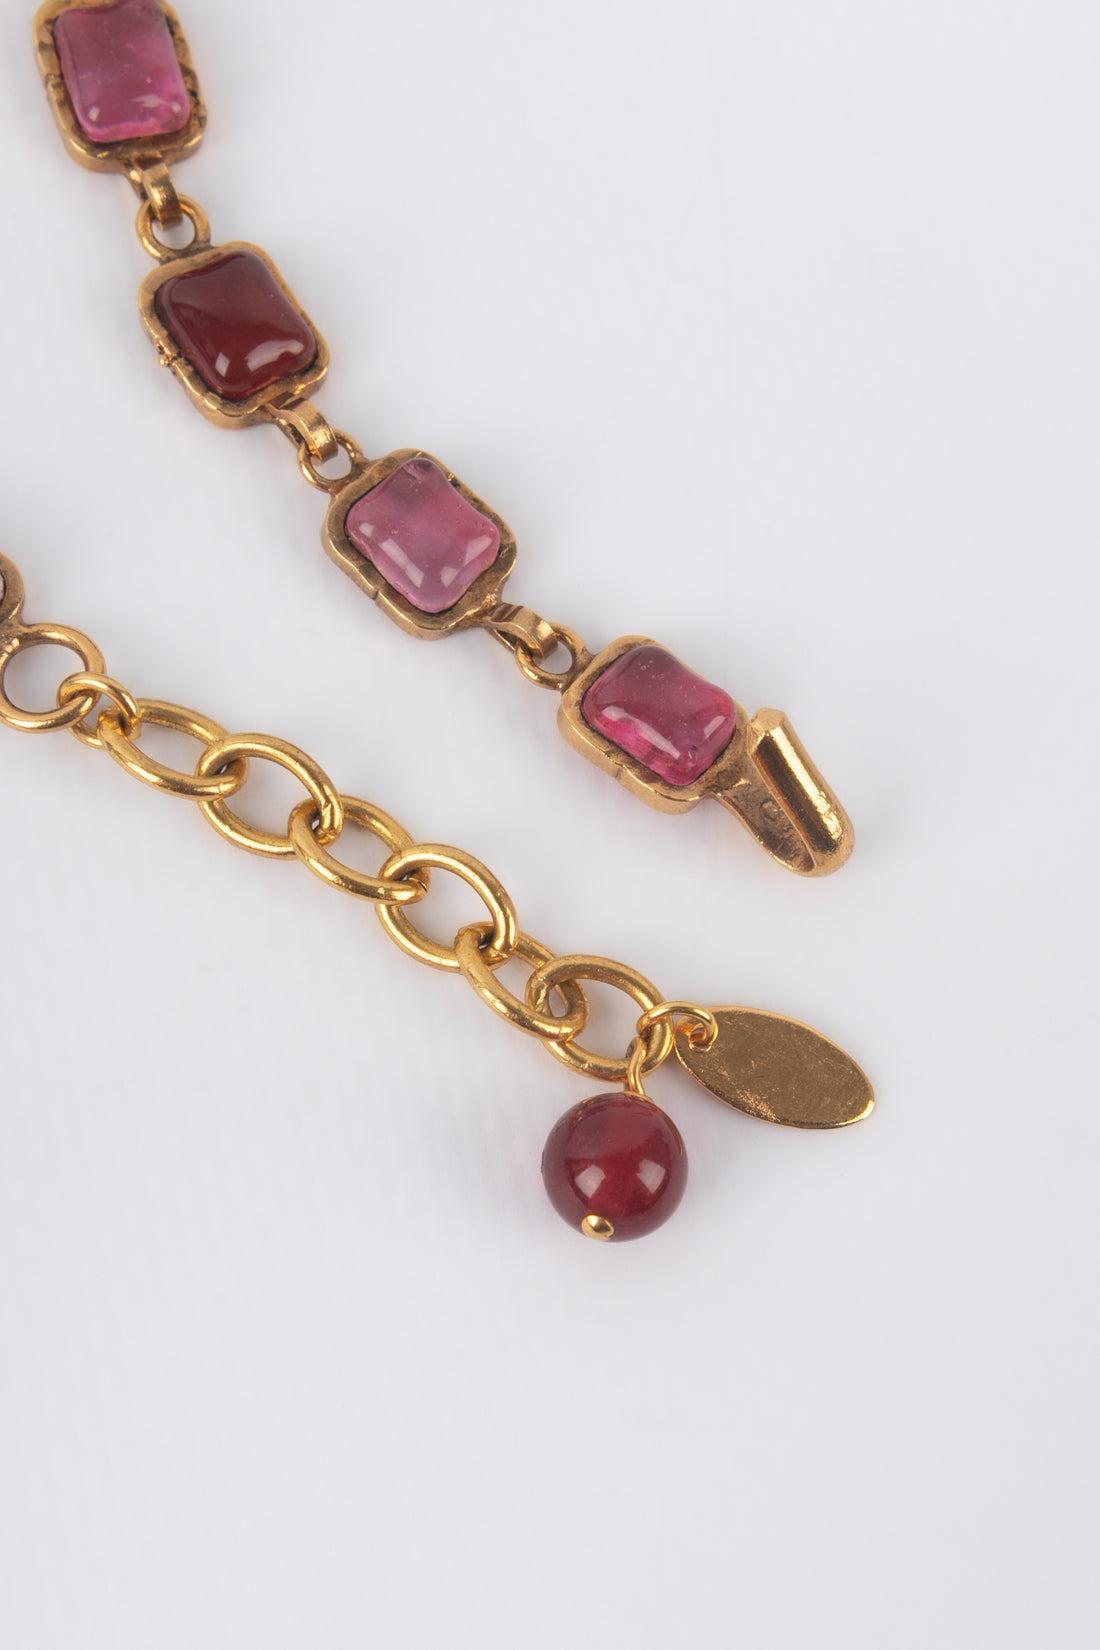 Chanel Golden Metal Necklace with Red Glass Paste, 1980s For Sale 5